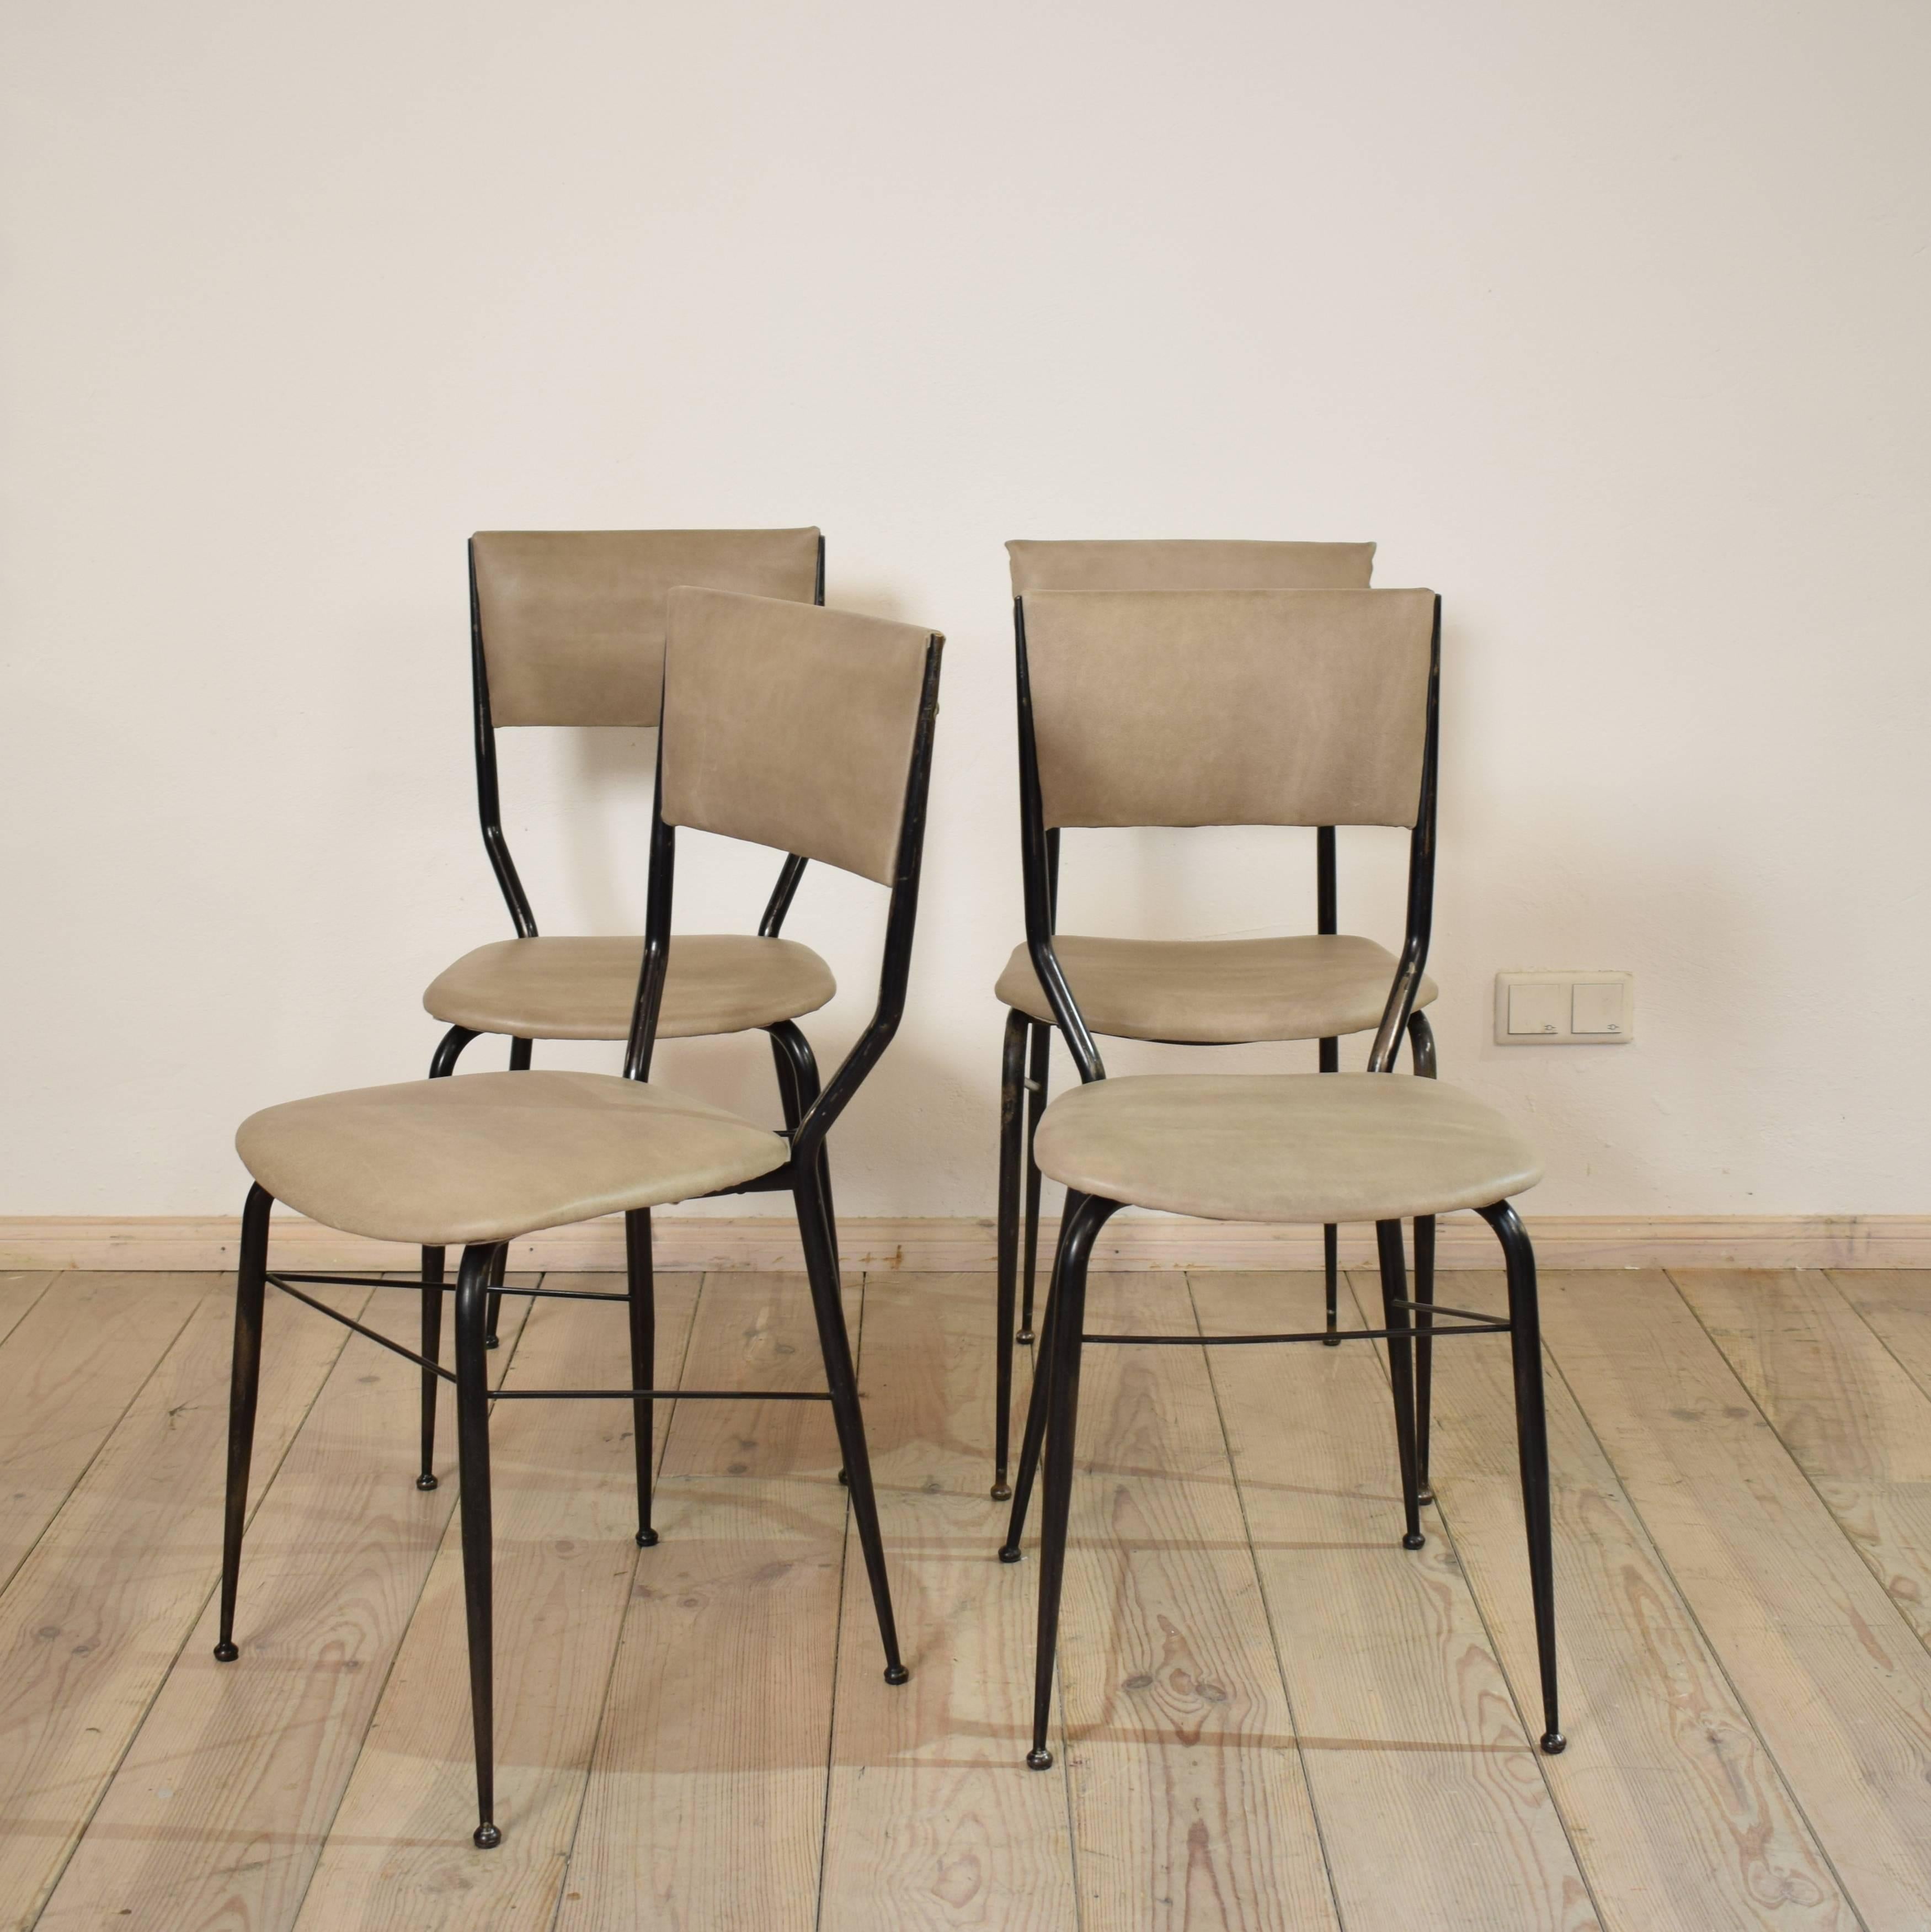 This set of four chairs from the 1950s was designed and manufactured in Italy. The chairs consist of an elegant metal frame and a padded seat and backrest. Three of the chairs are identical. One has a different backrest. The chairs have been newly